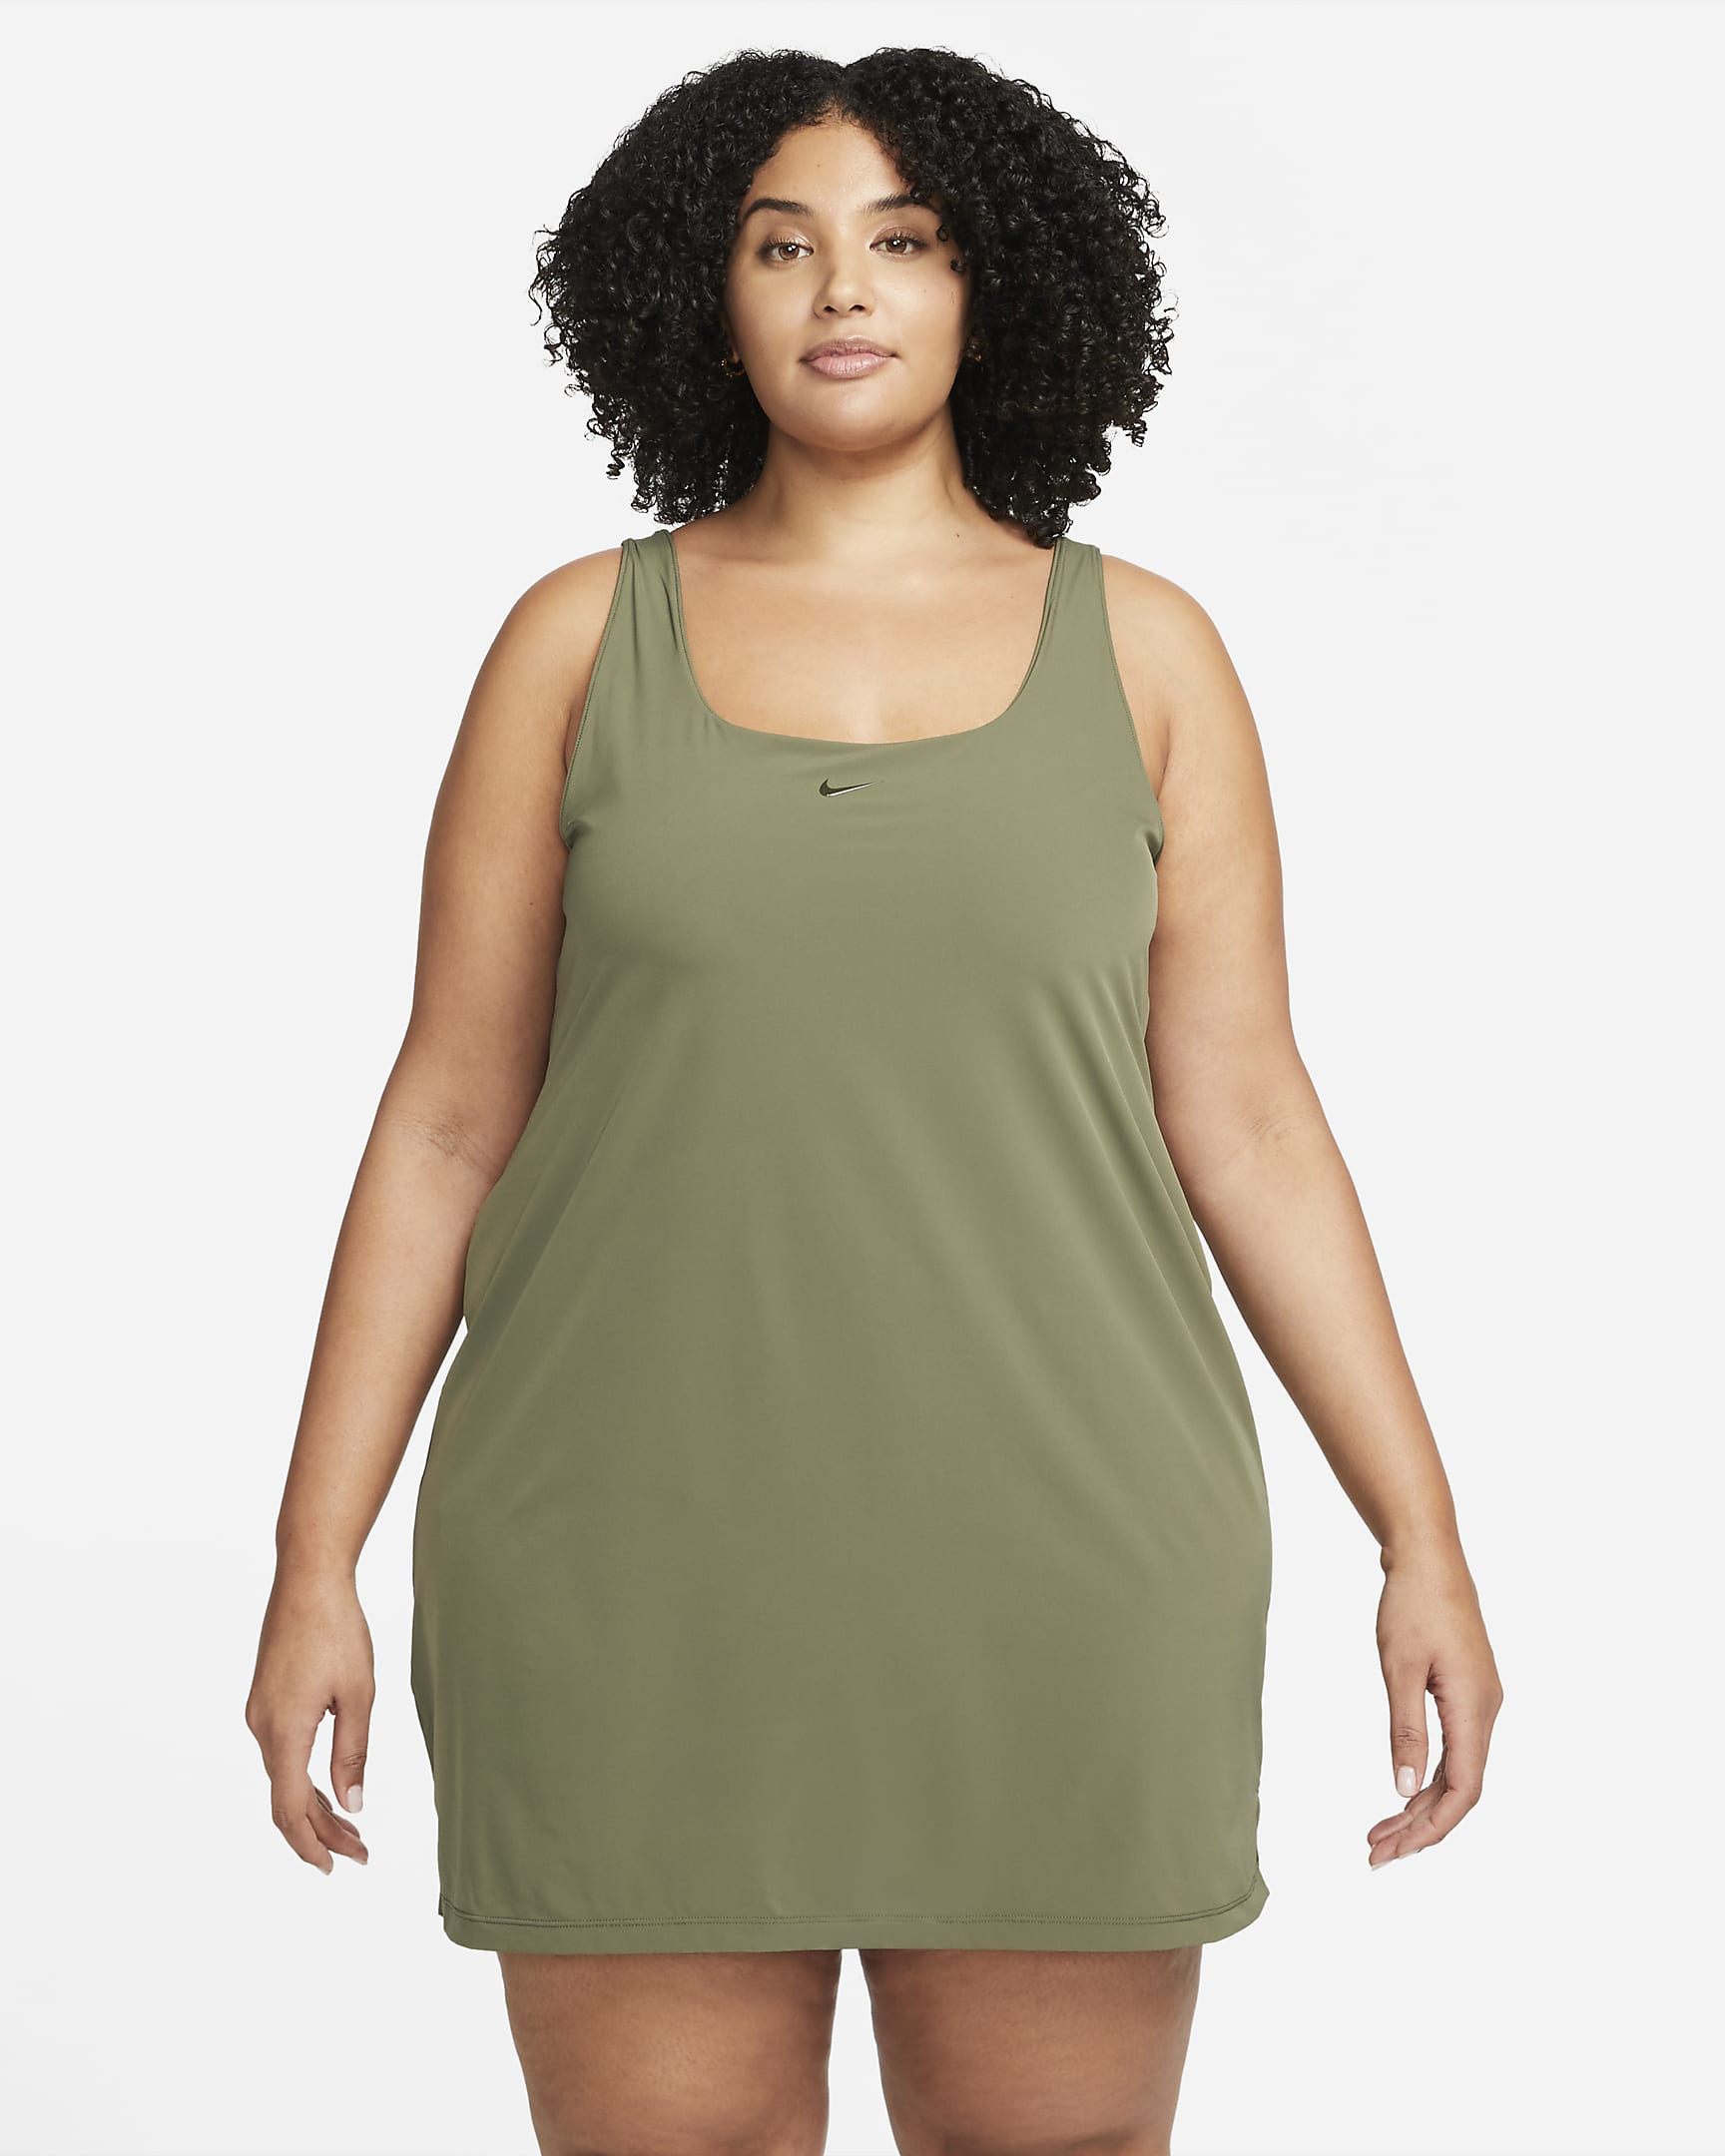 Nike Bliss Luxe Women\'s Training Dress (Plus Size) Medium Olive/Clear